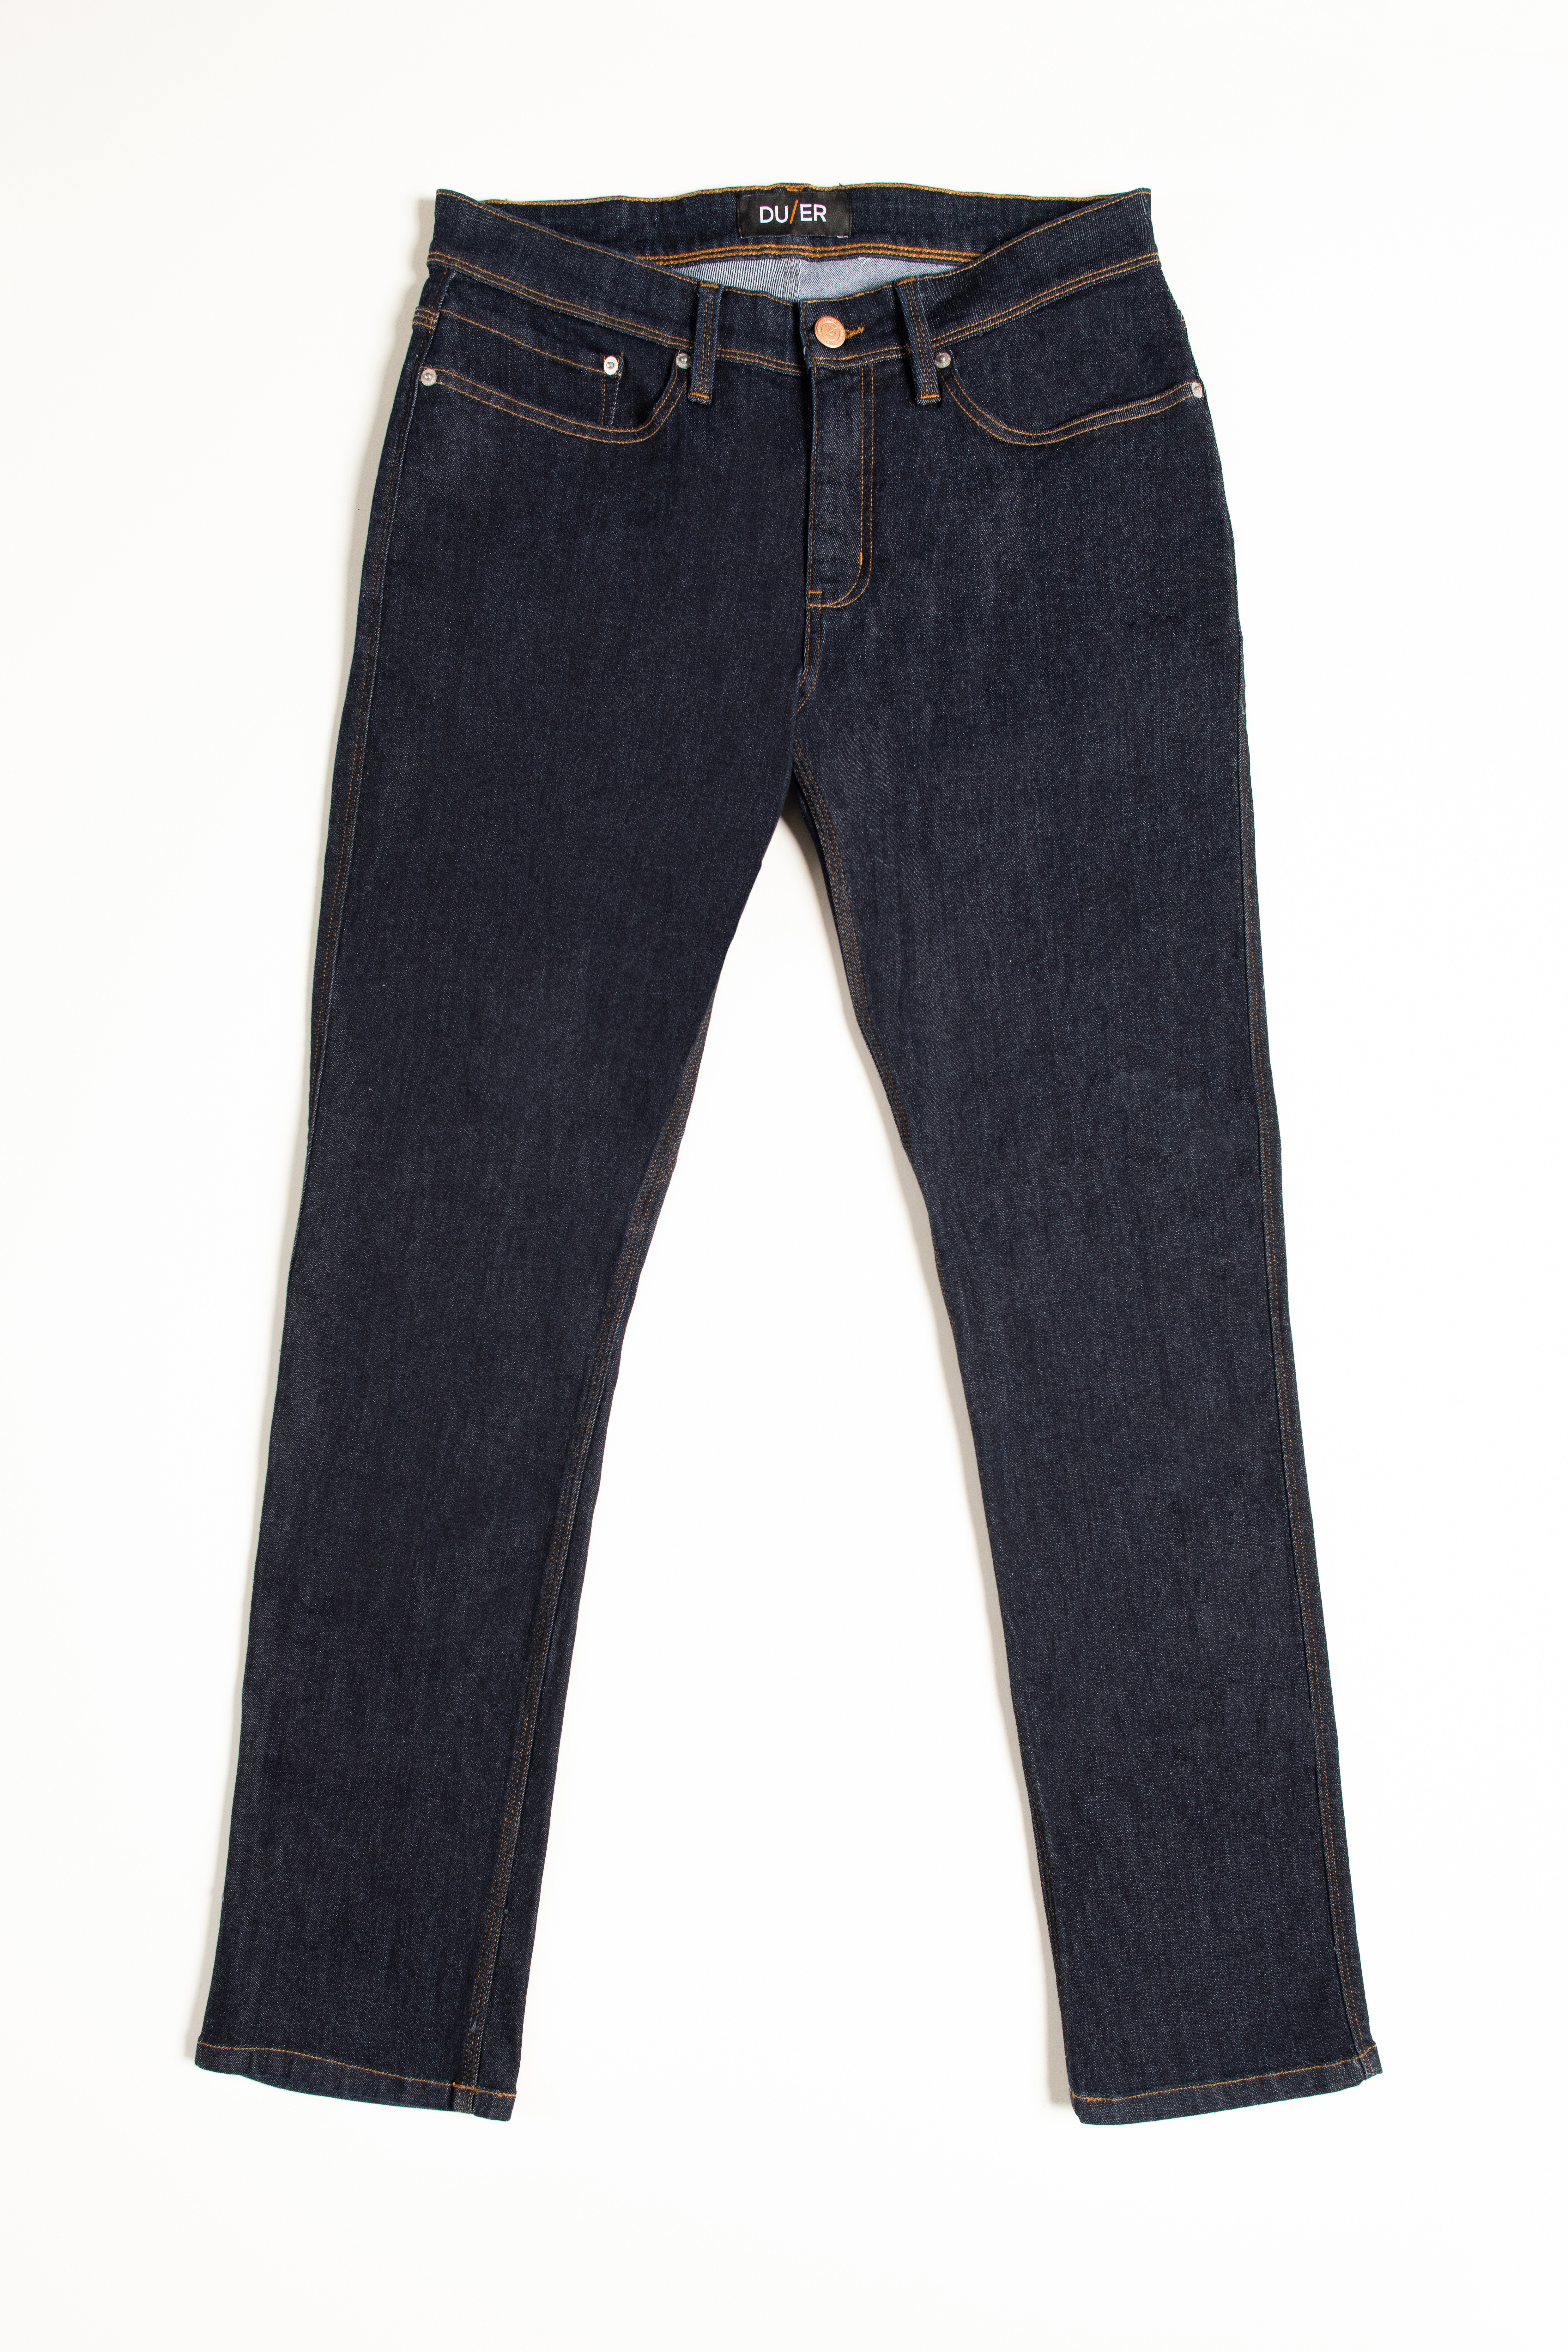 DUER Performance Denim Pants Relaxed Men heritage rinse | Addnature.co.uk